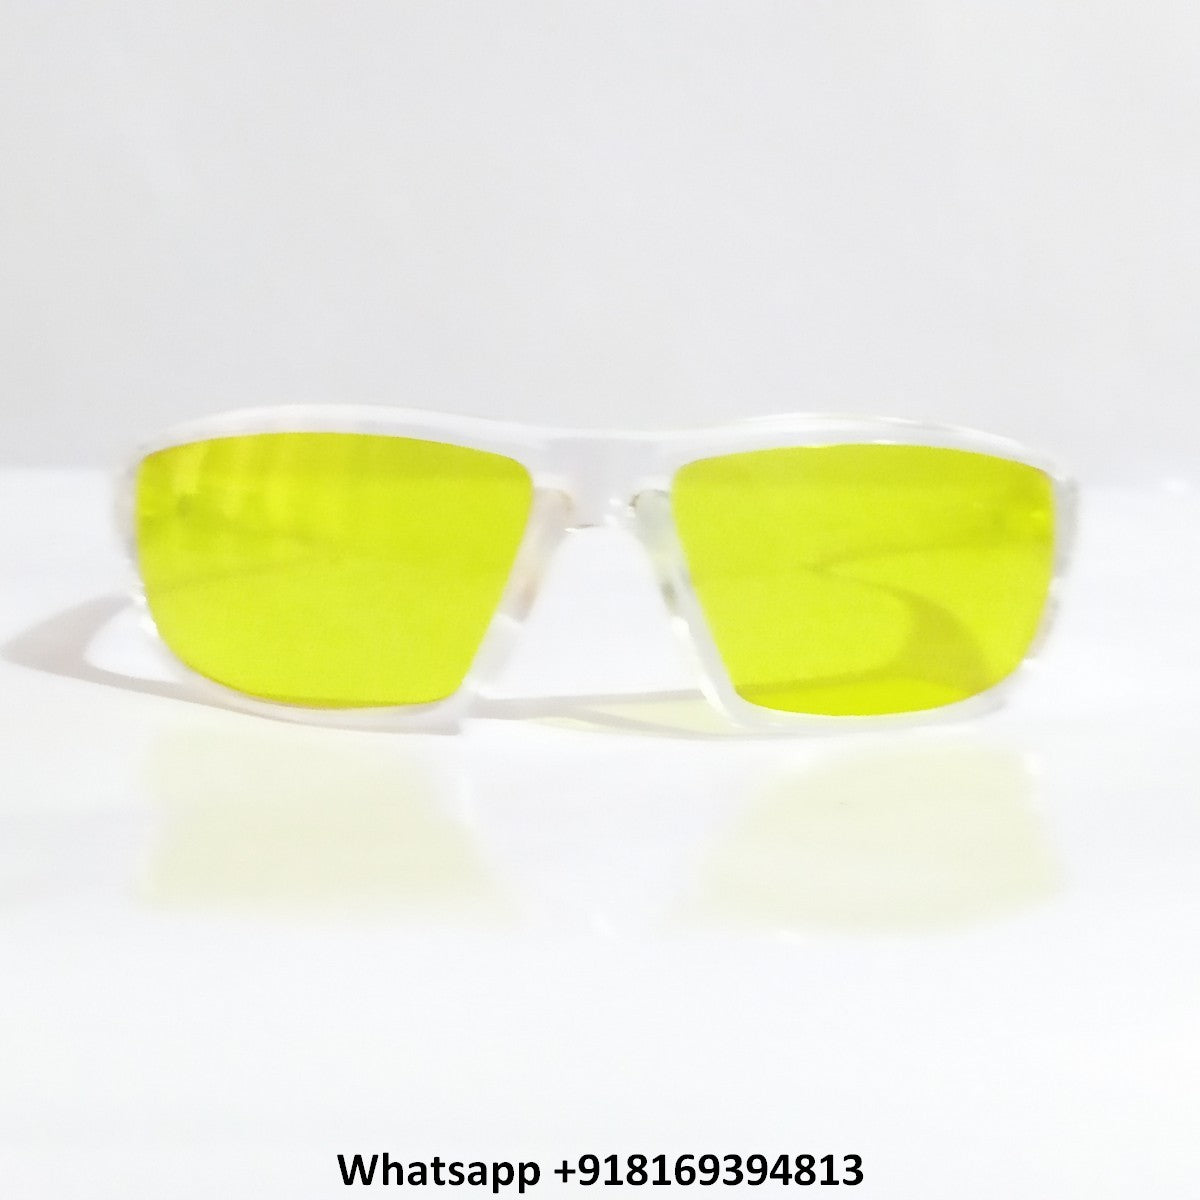 Night Driving Glasses for Men and Women Sunglasses with HD Yellow Lens M09 - Glasses India Online